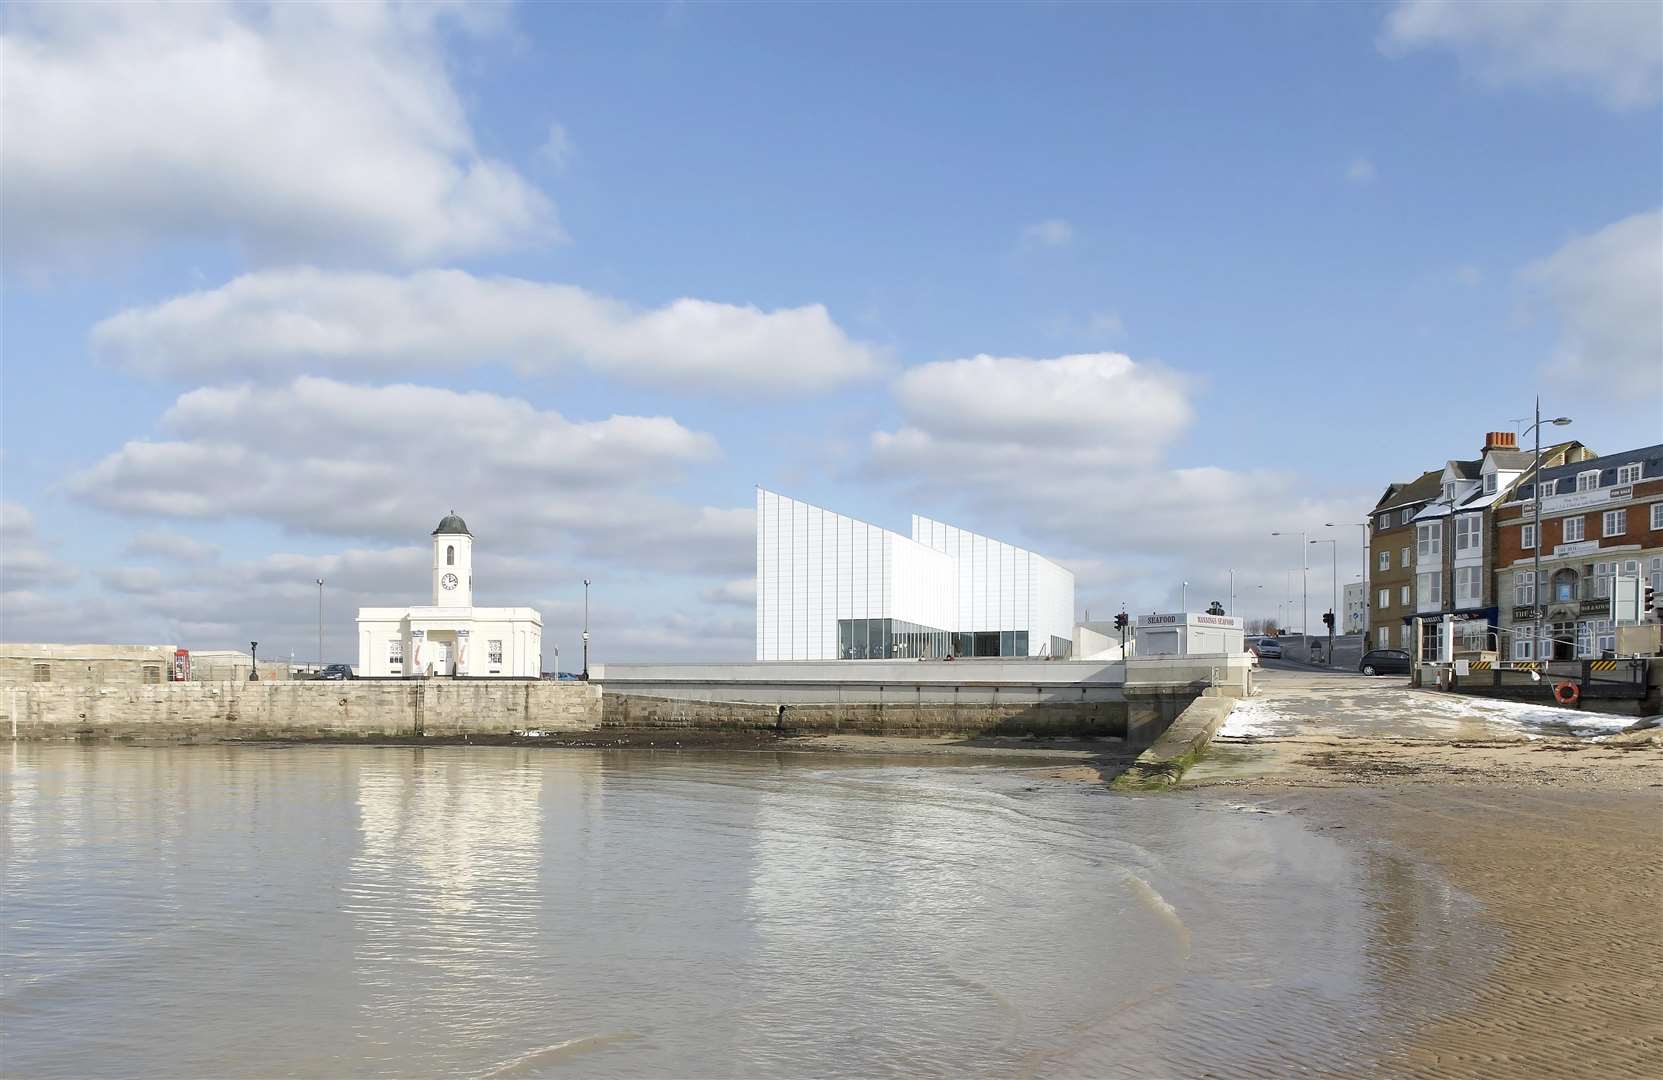 Improving toilet facilities, the cafe and shop are among plans for the Turner Contemporary